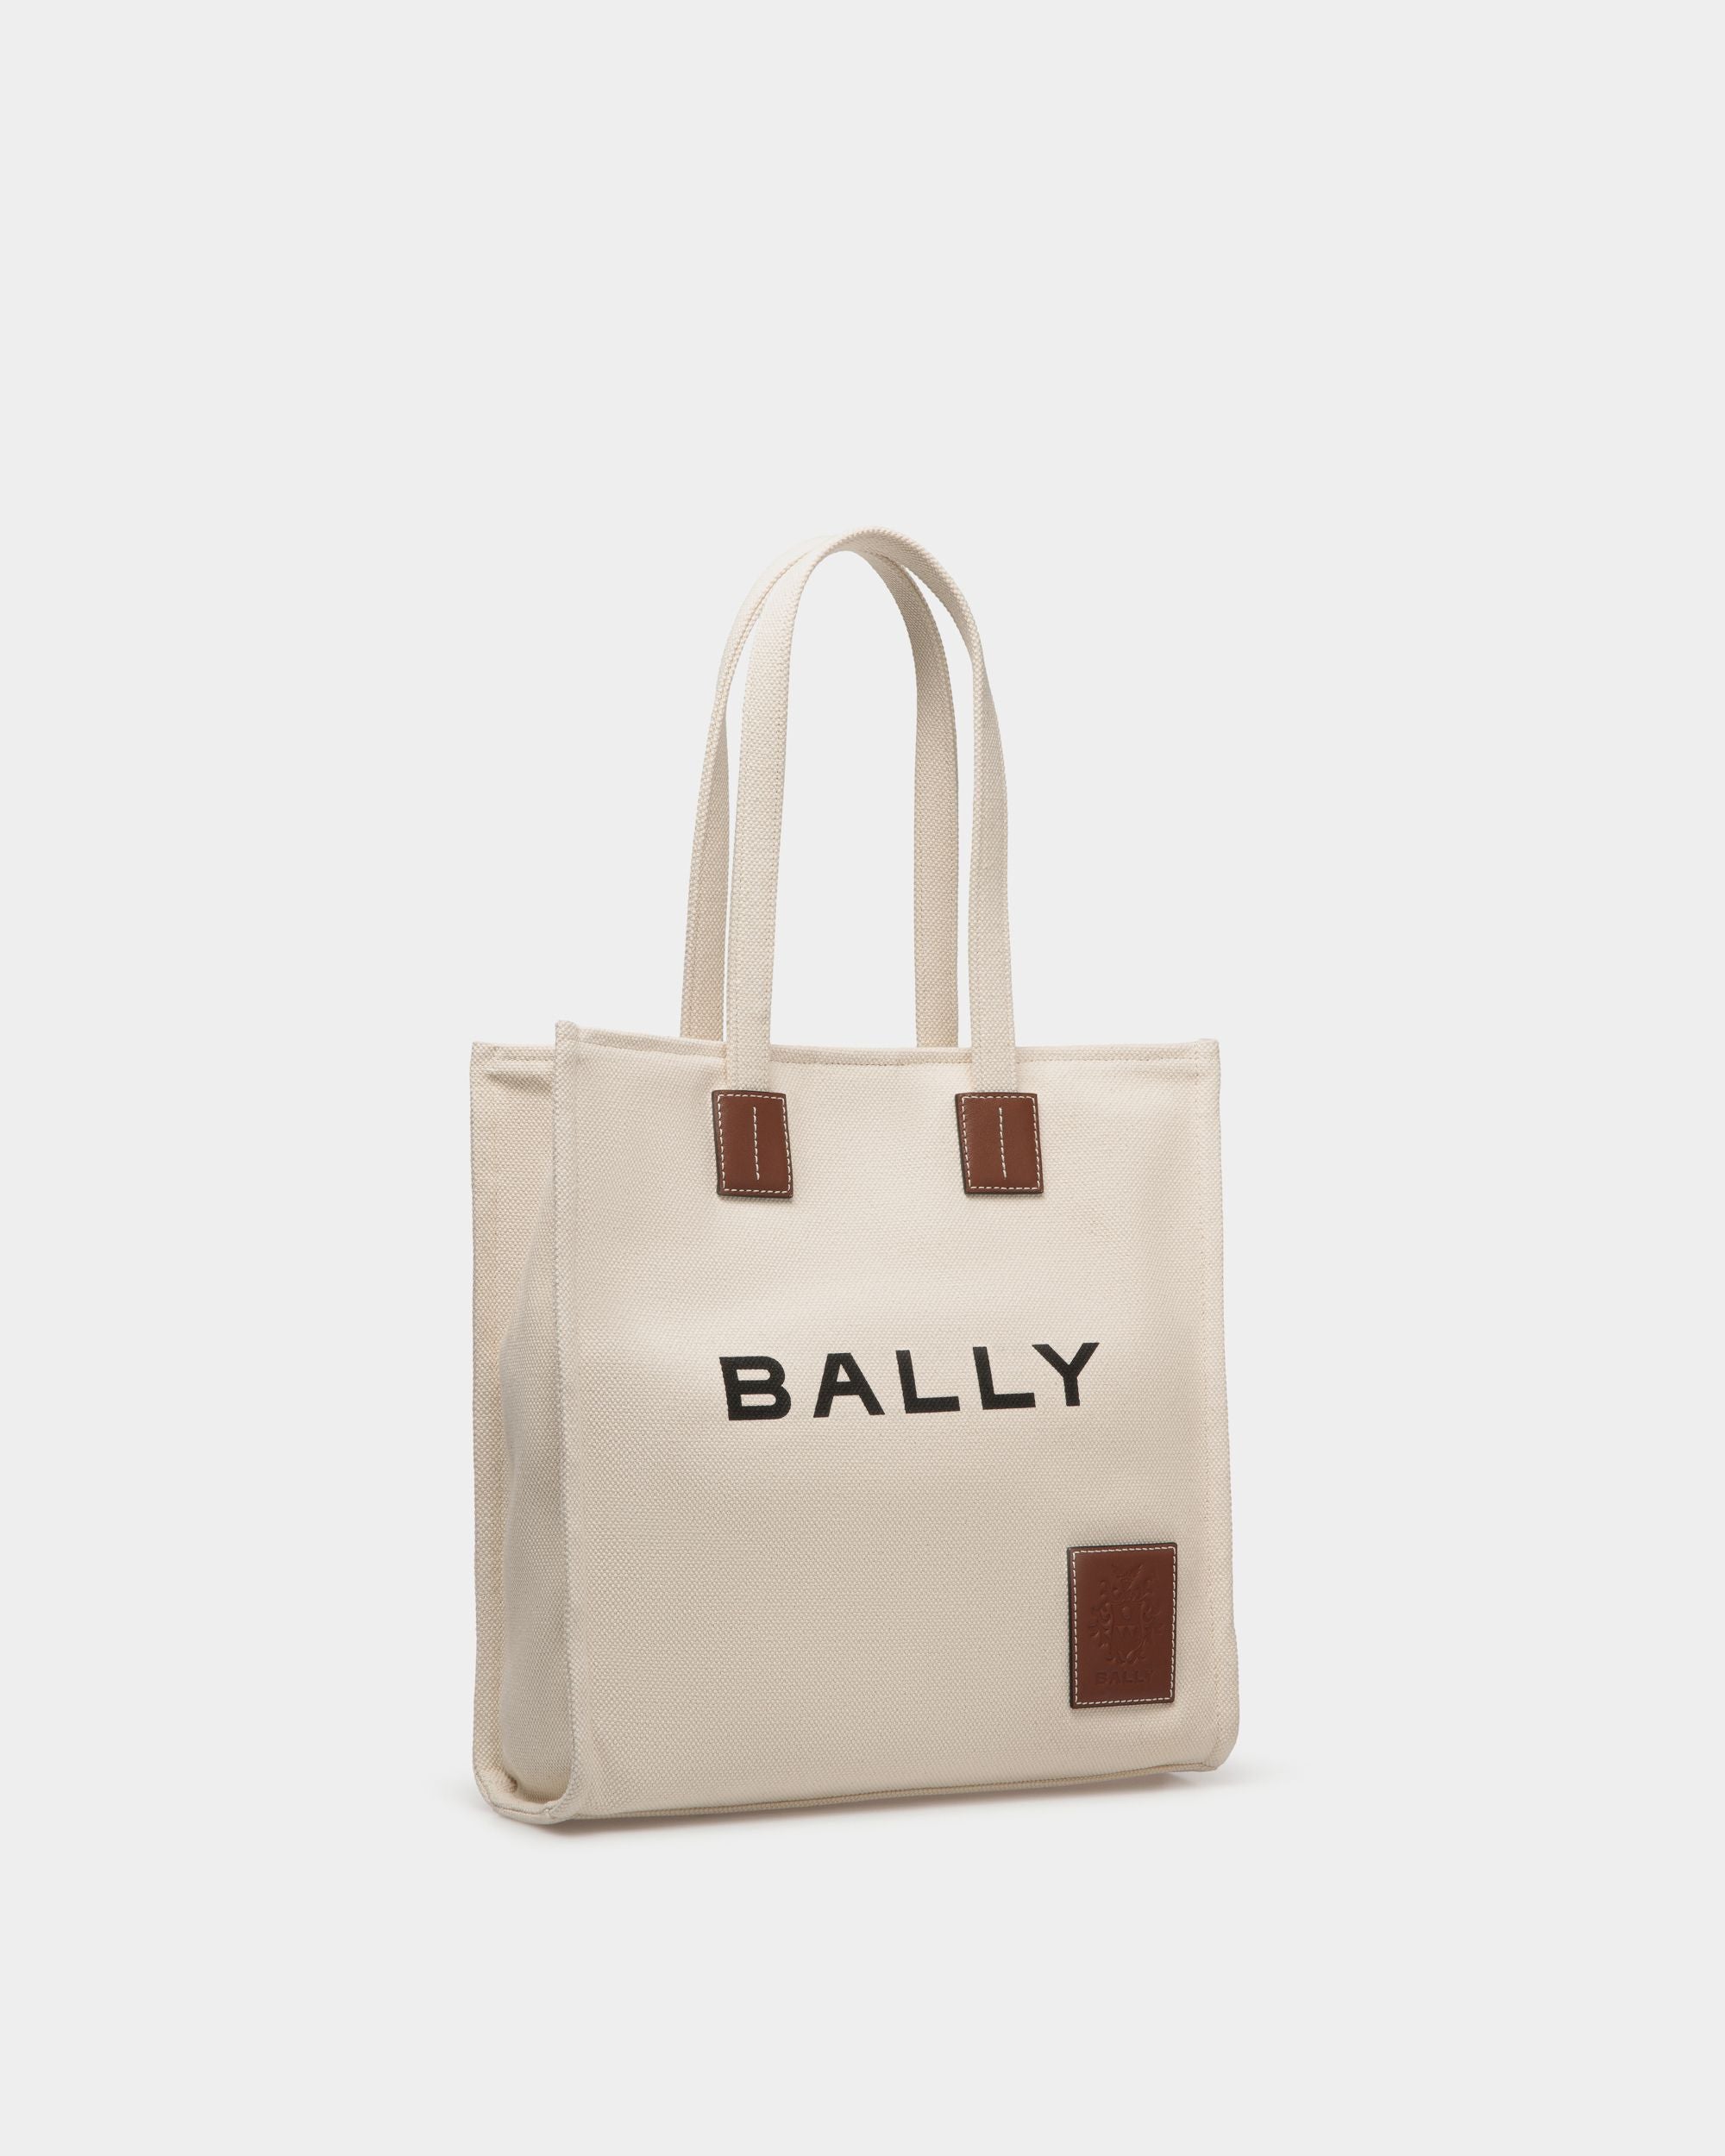 Akelei | Women's Tote Bag in Neutral Canvas | Bally | Still Life 3/4 Front